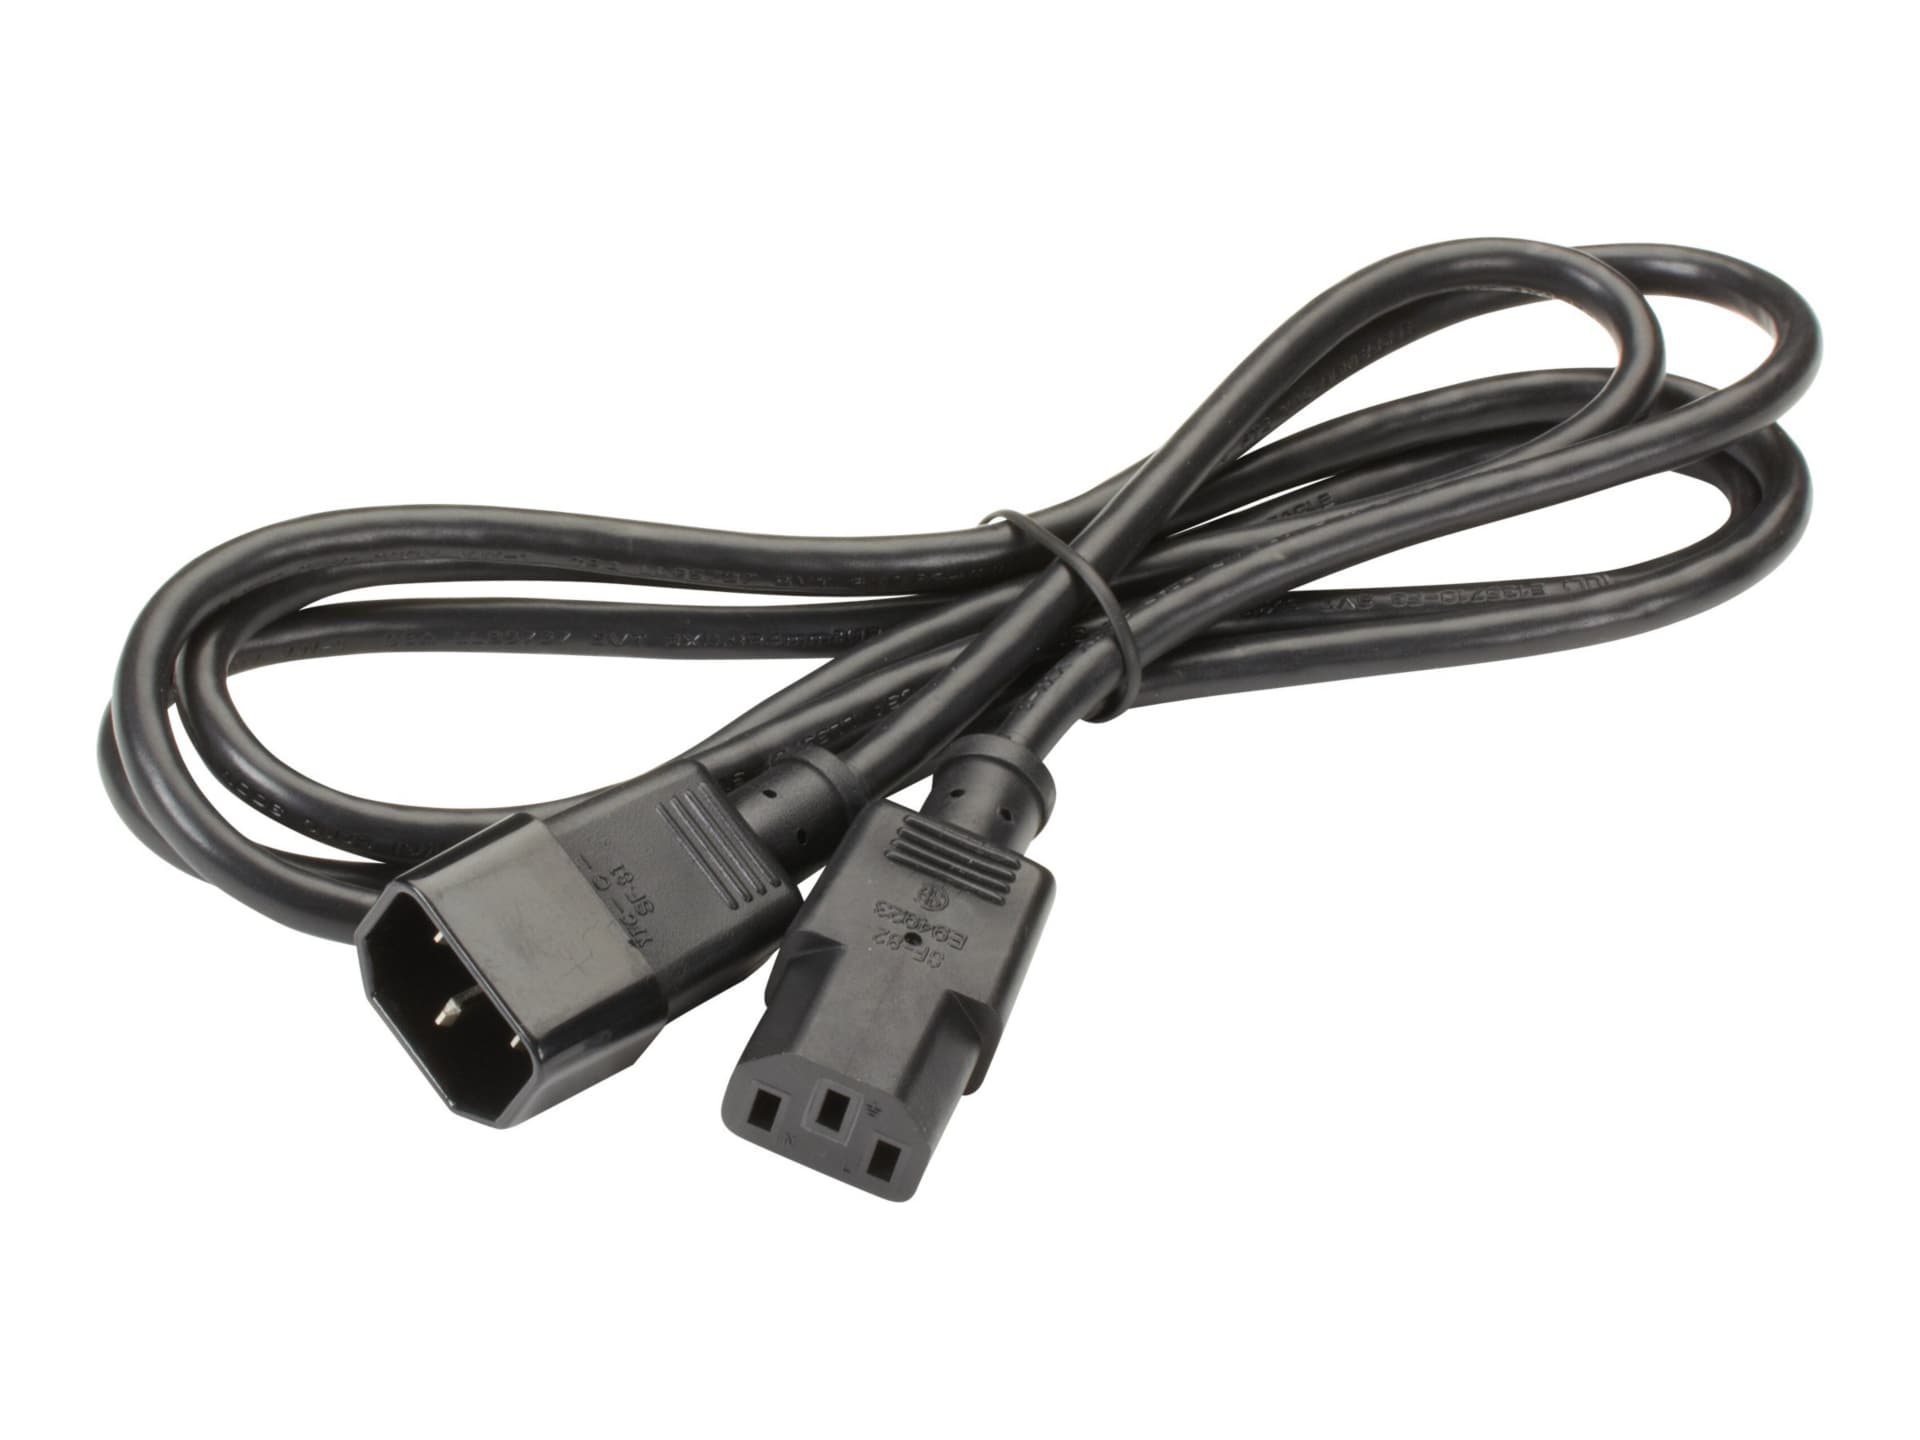 Black Box - power extension cable - IEC 60320 C13 to IEC 60320 C14 - 6 ft